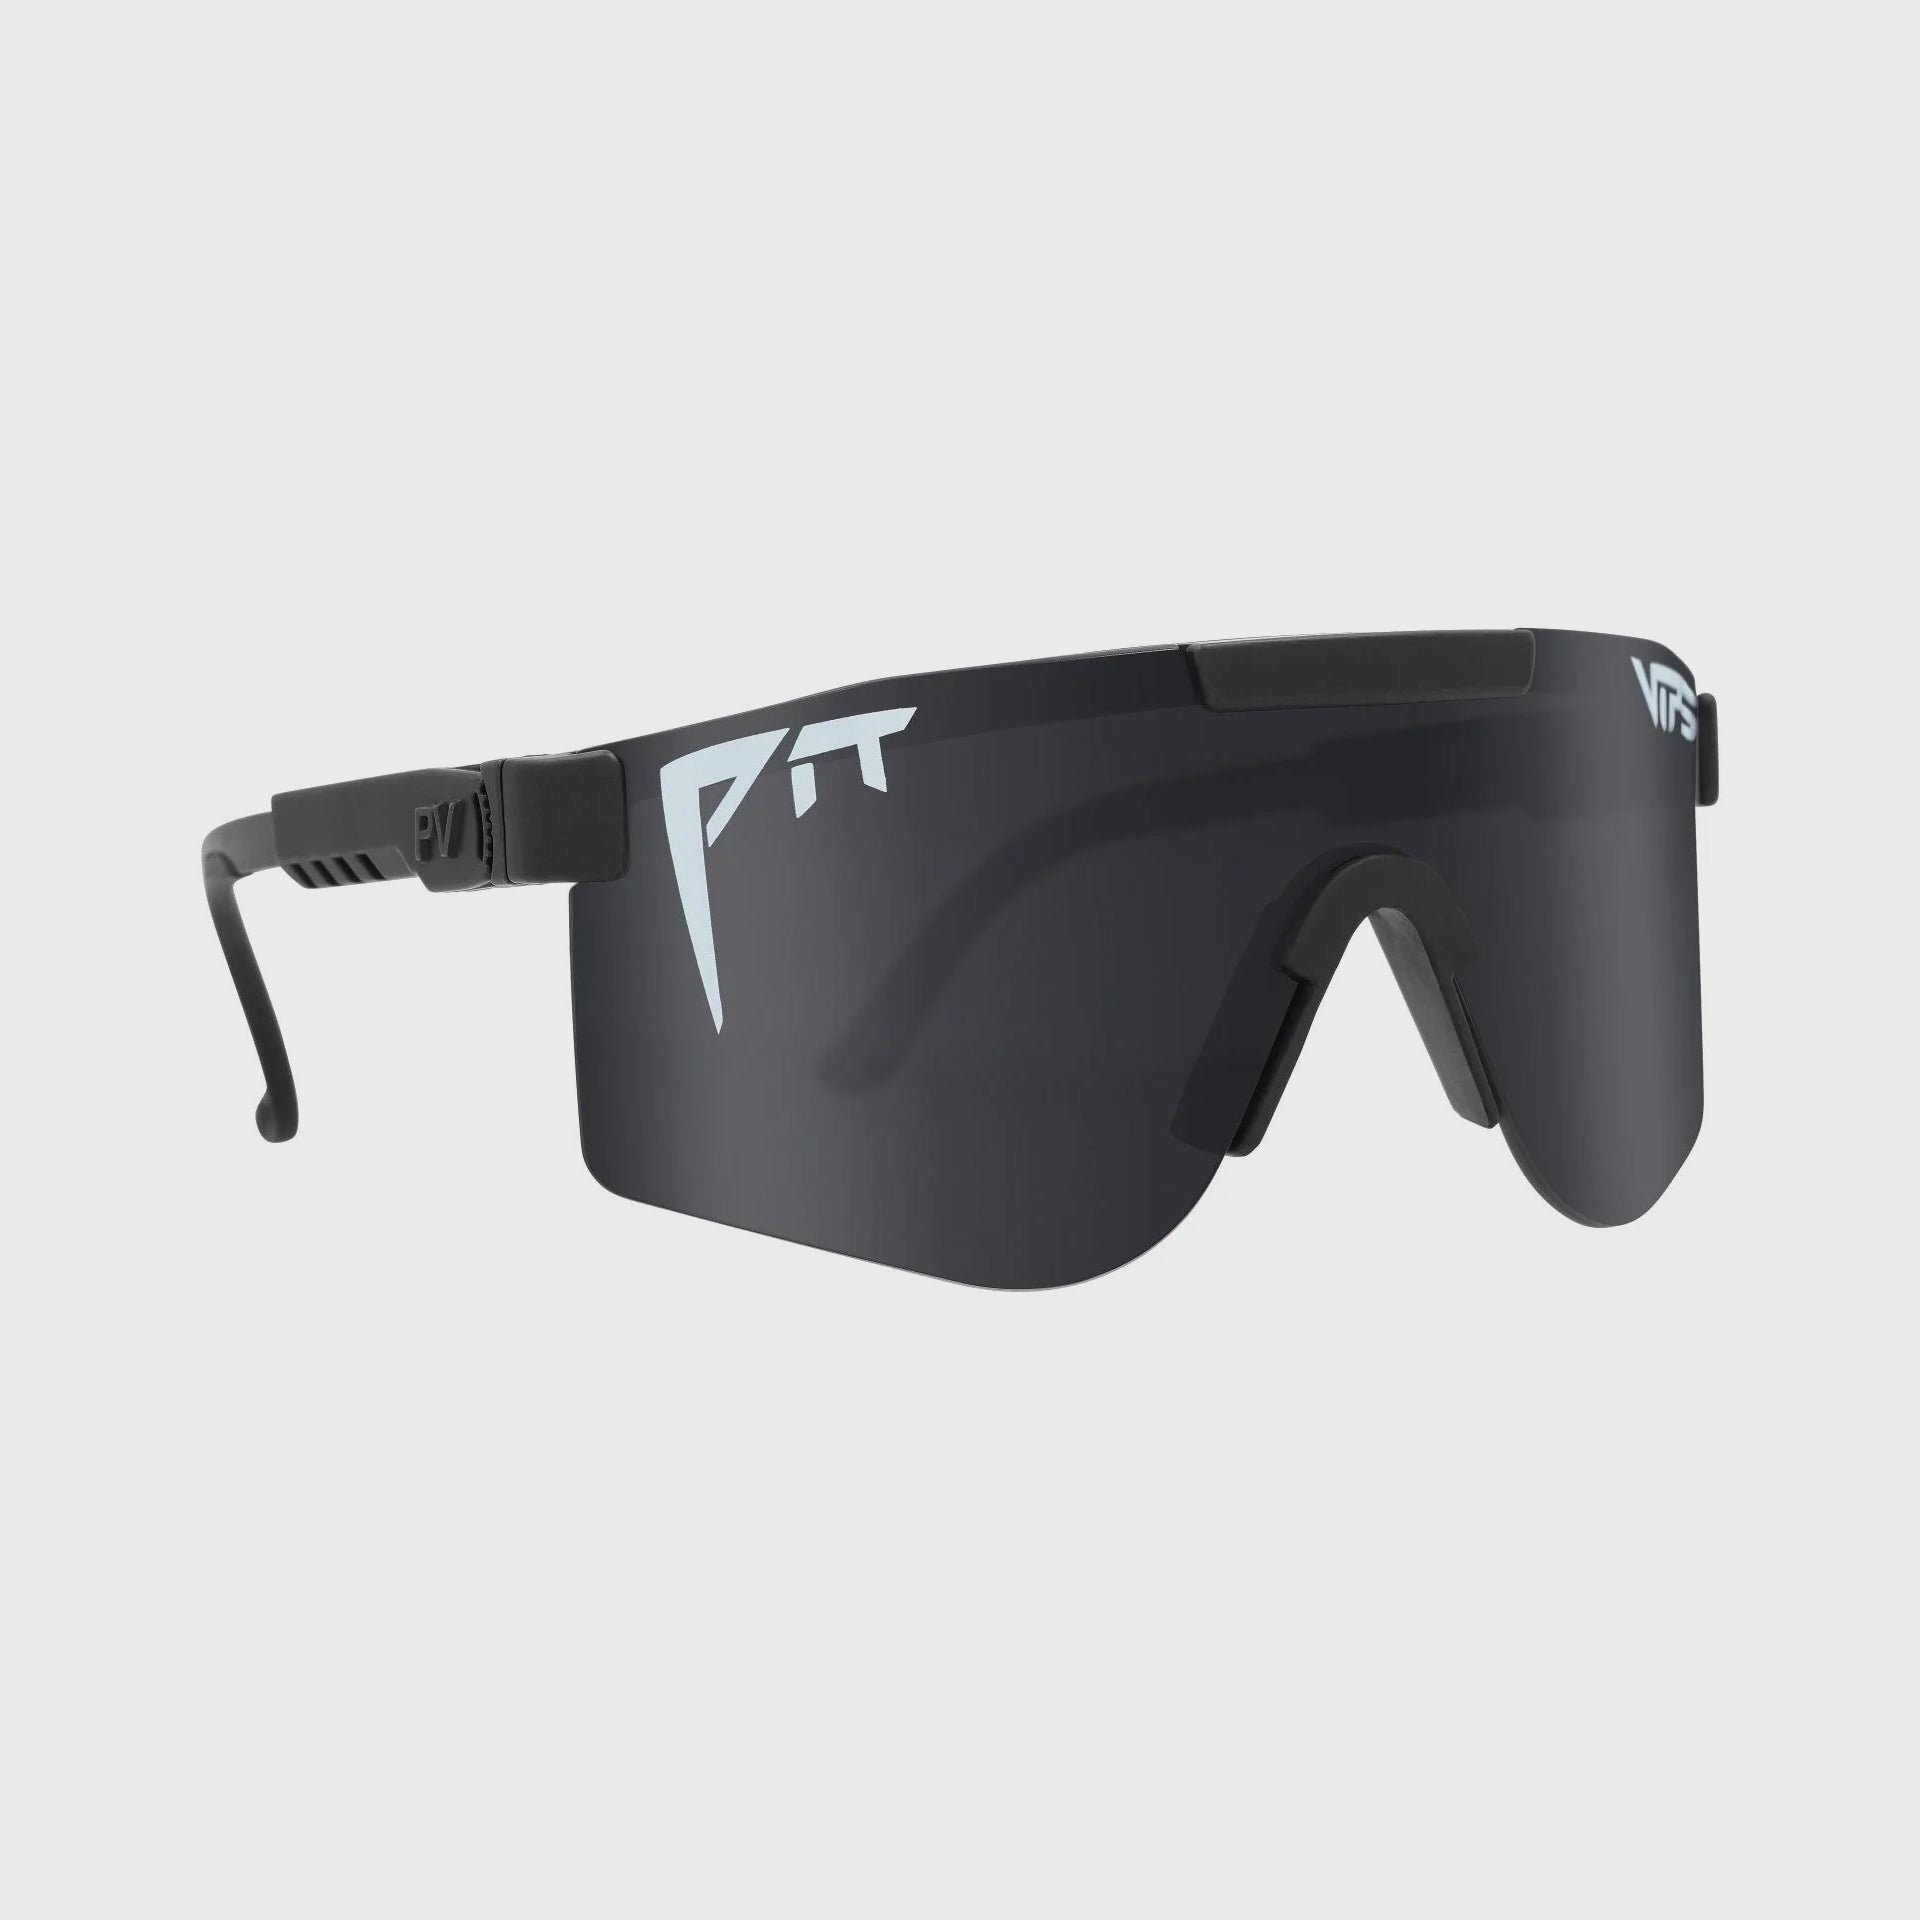 Pit Viper The Standard Polarized Double Wide Sunglasses - ManGo Surfing